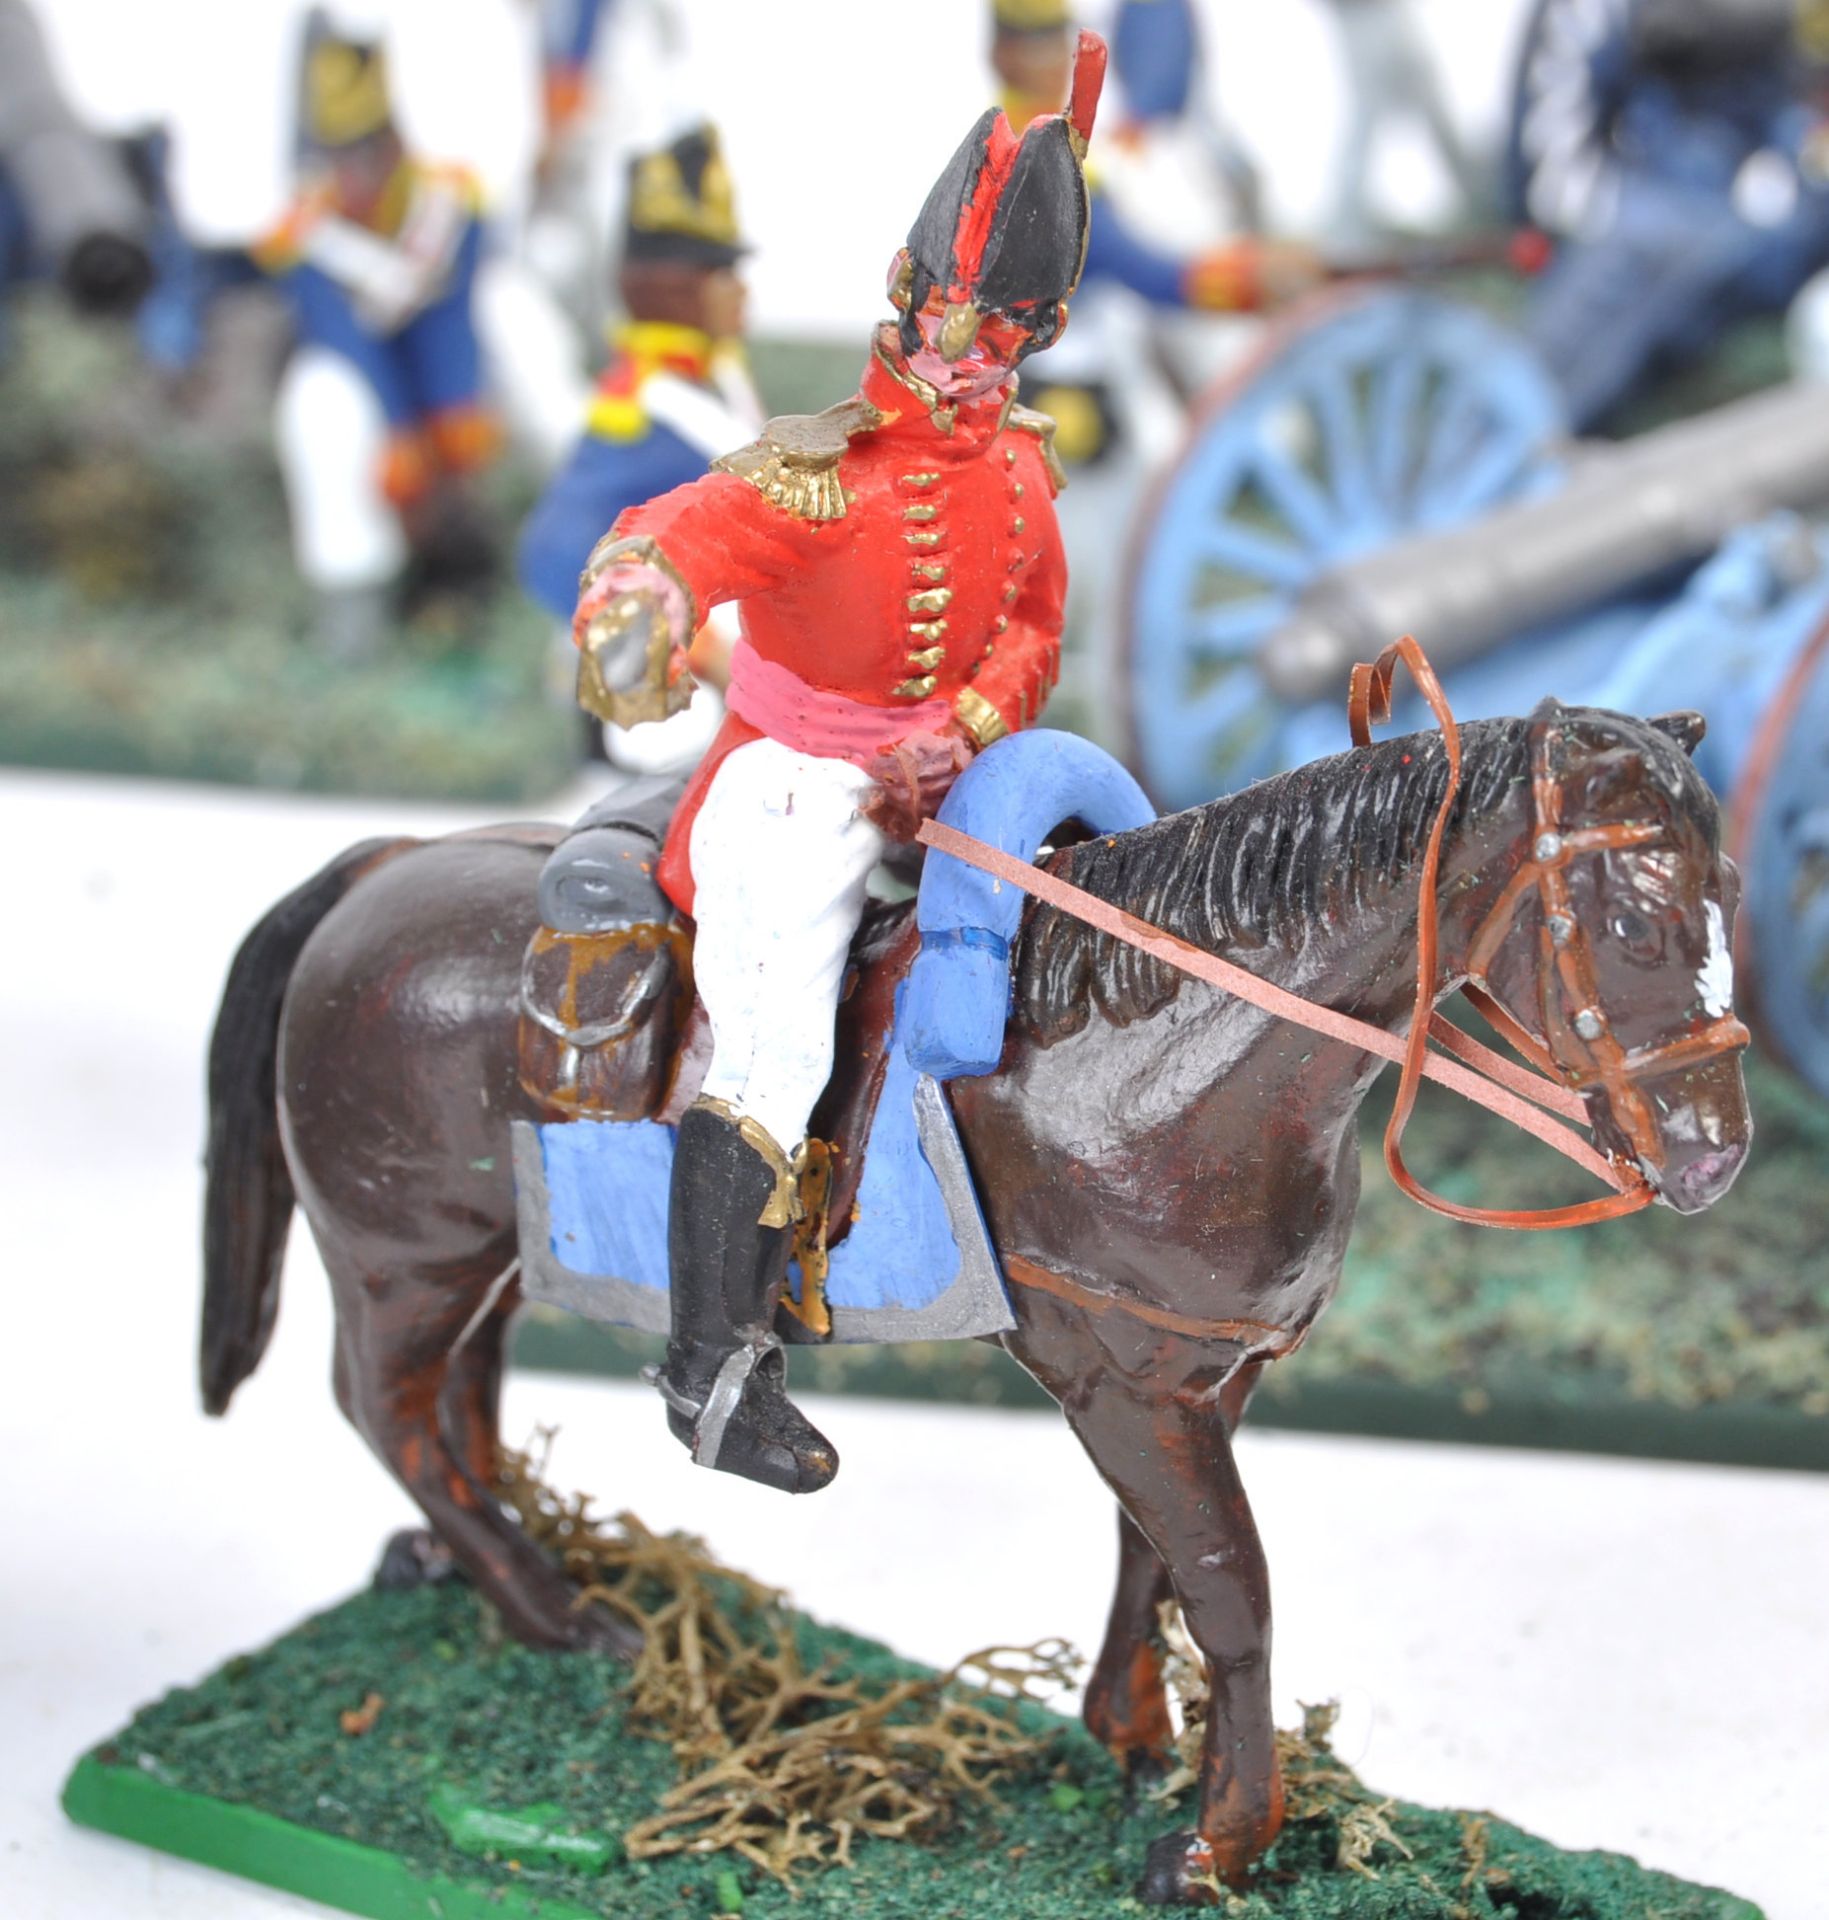 COLLECTION OF 1/32 SCALE PLASTIC NAPOLEONIC SOLDIER FIGURES - Image 4 of 5